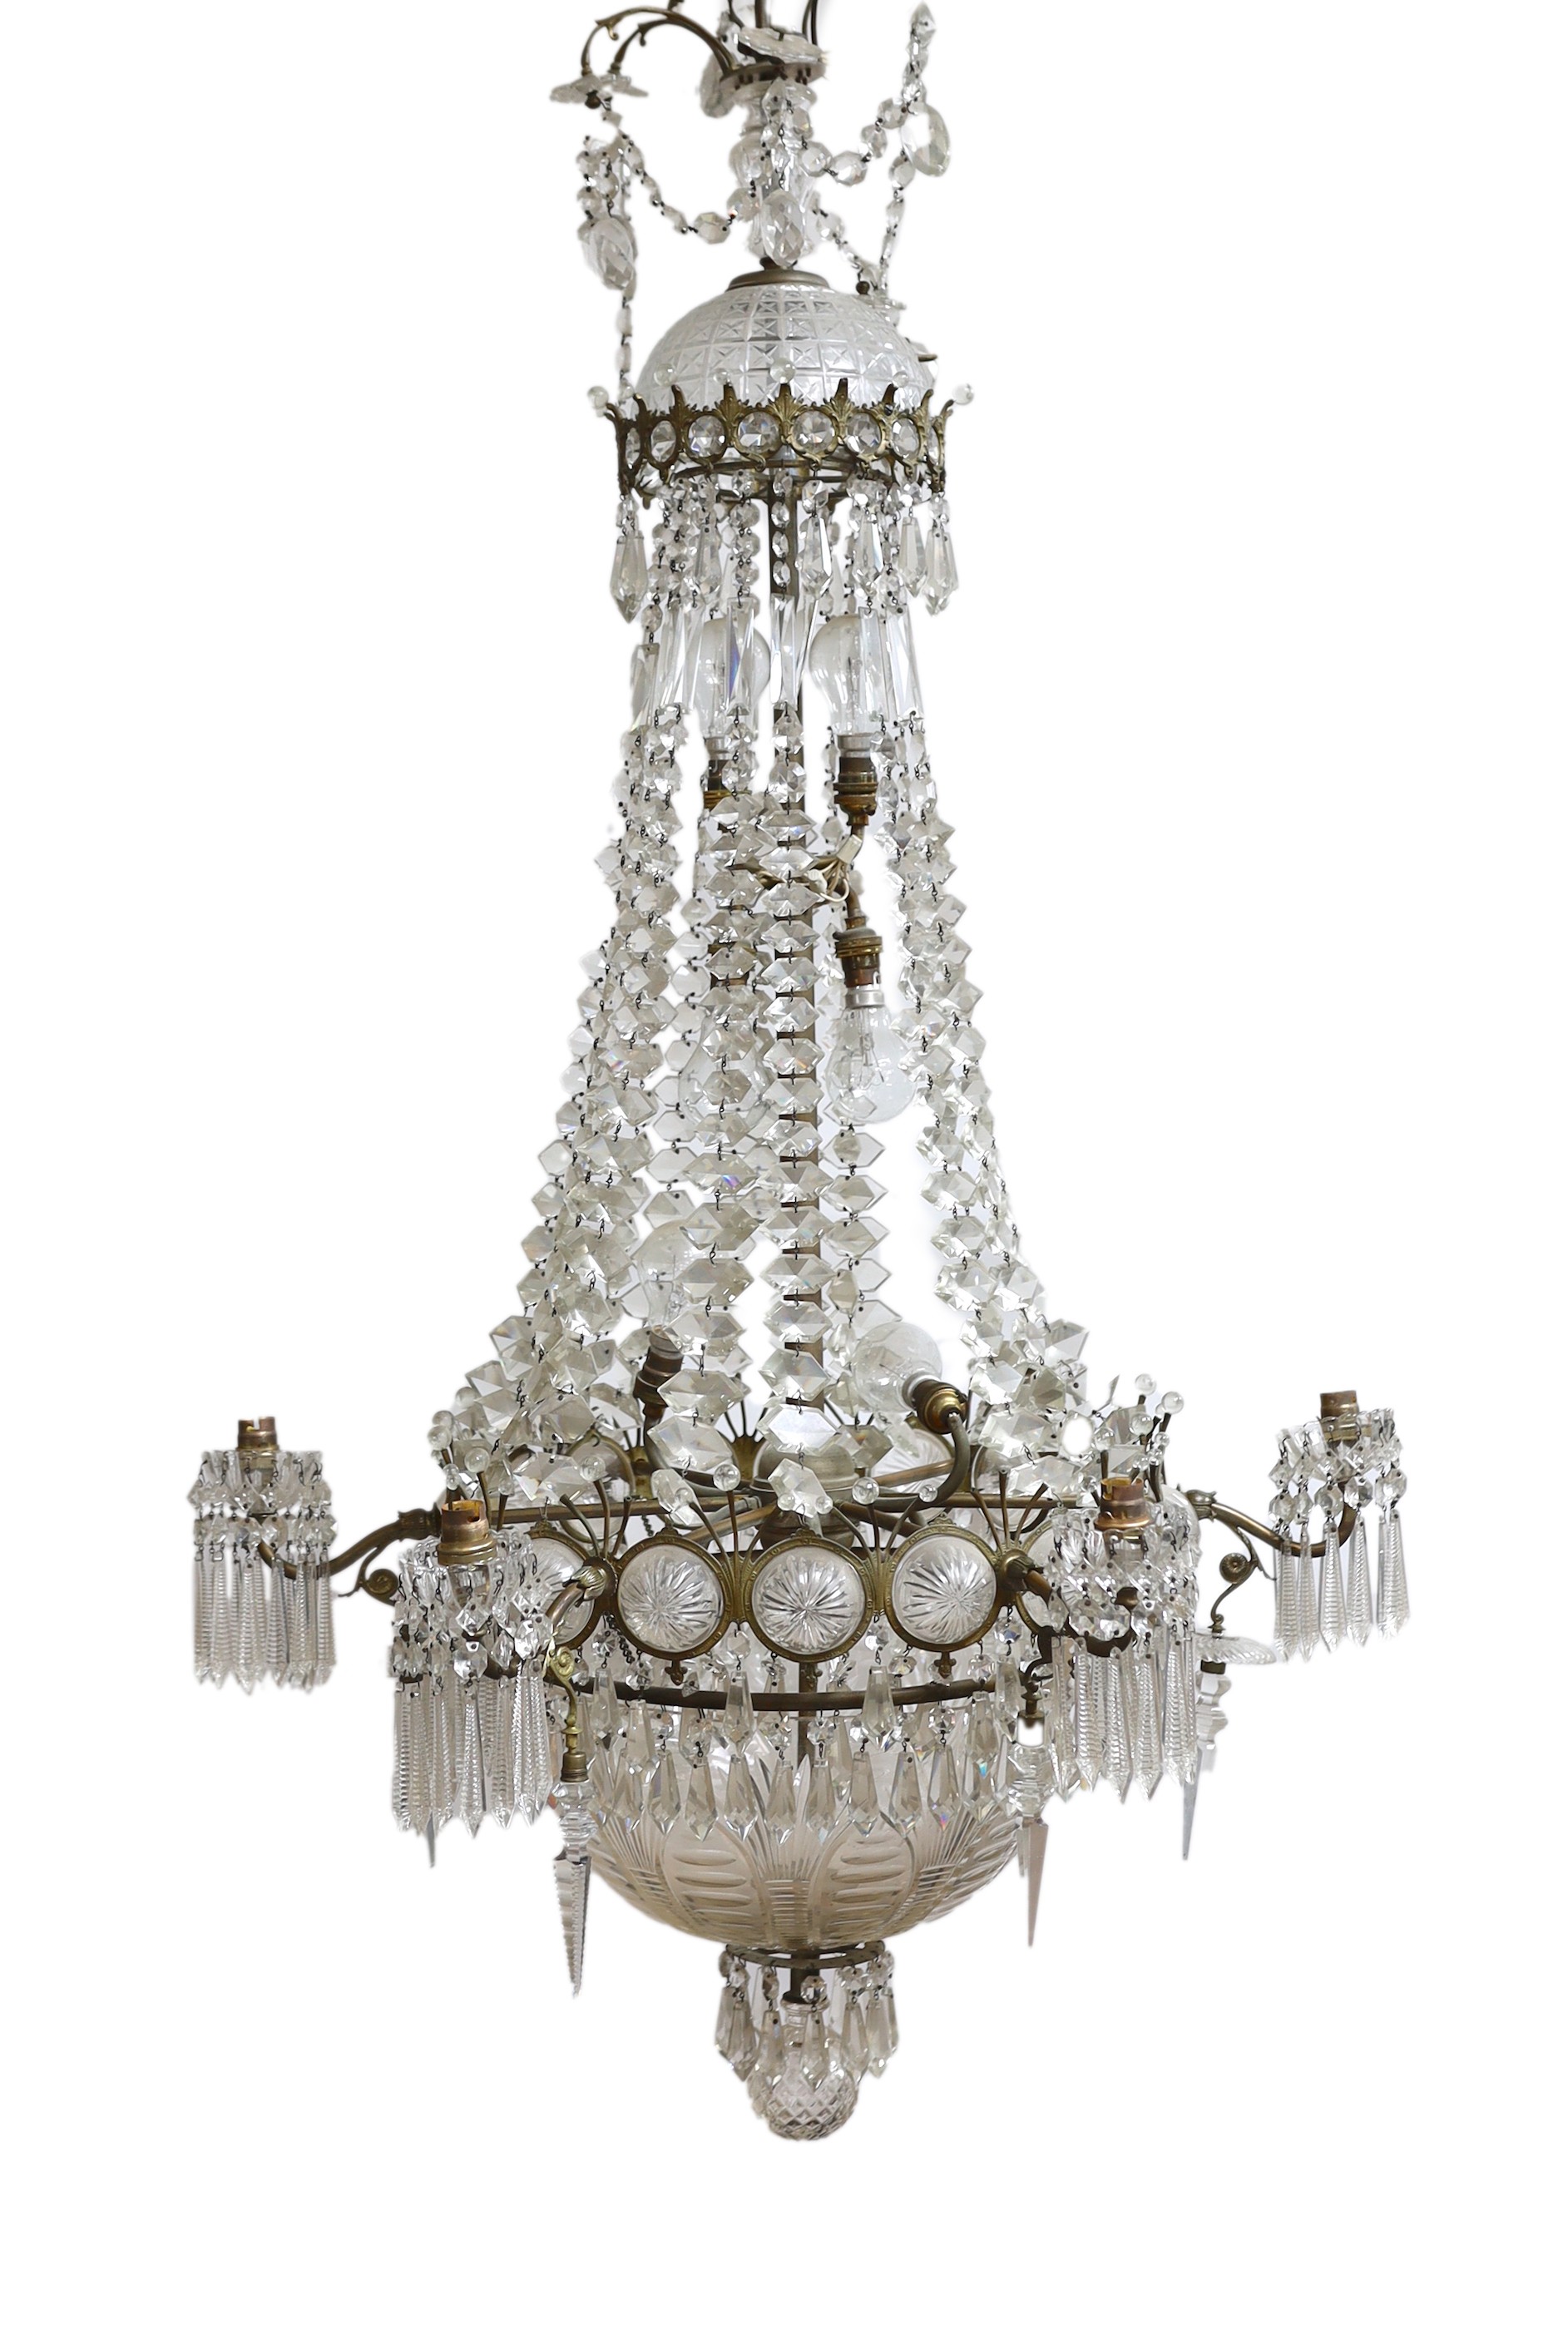 An Edwardian cut glass chandelier, with swagged top and lozenge shaped drops sweeping down to the